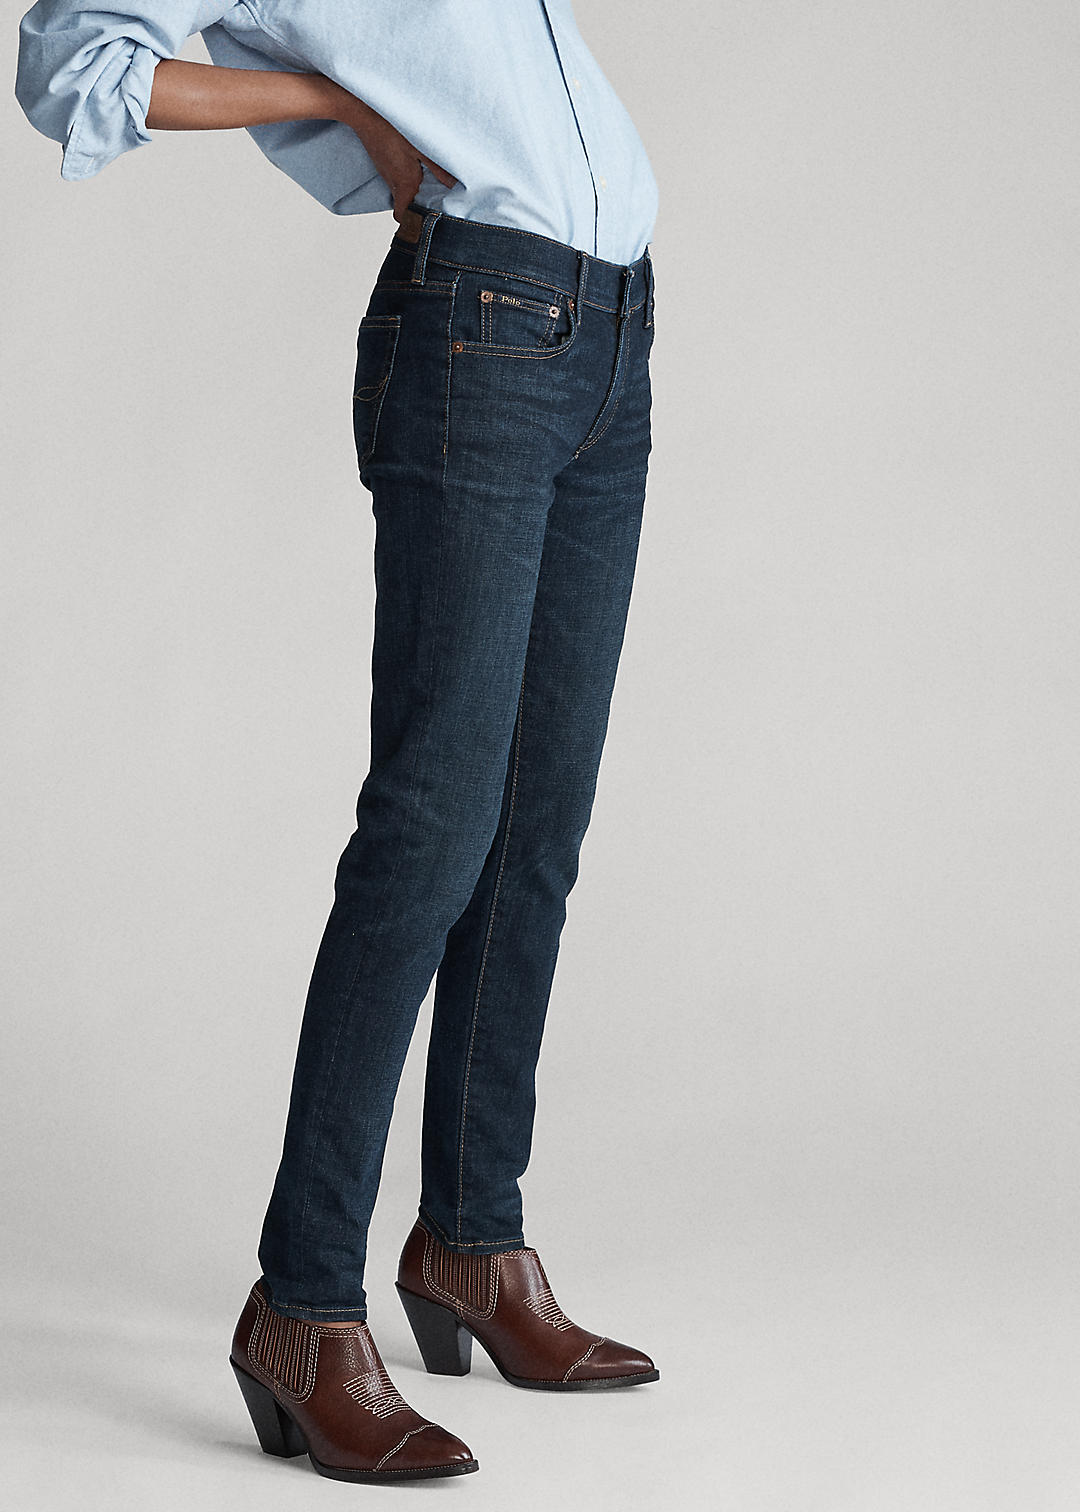 Polo Ralph Lauren Tompkins Skinny Jean with Polo 4